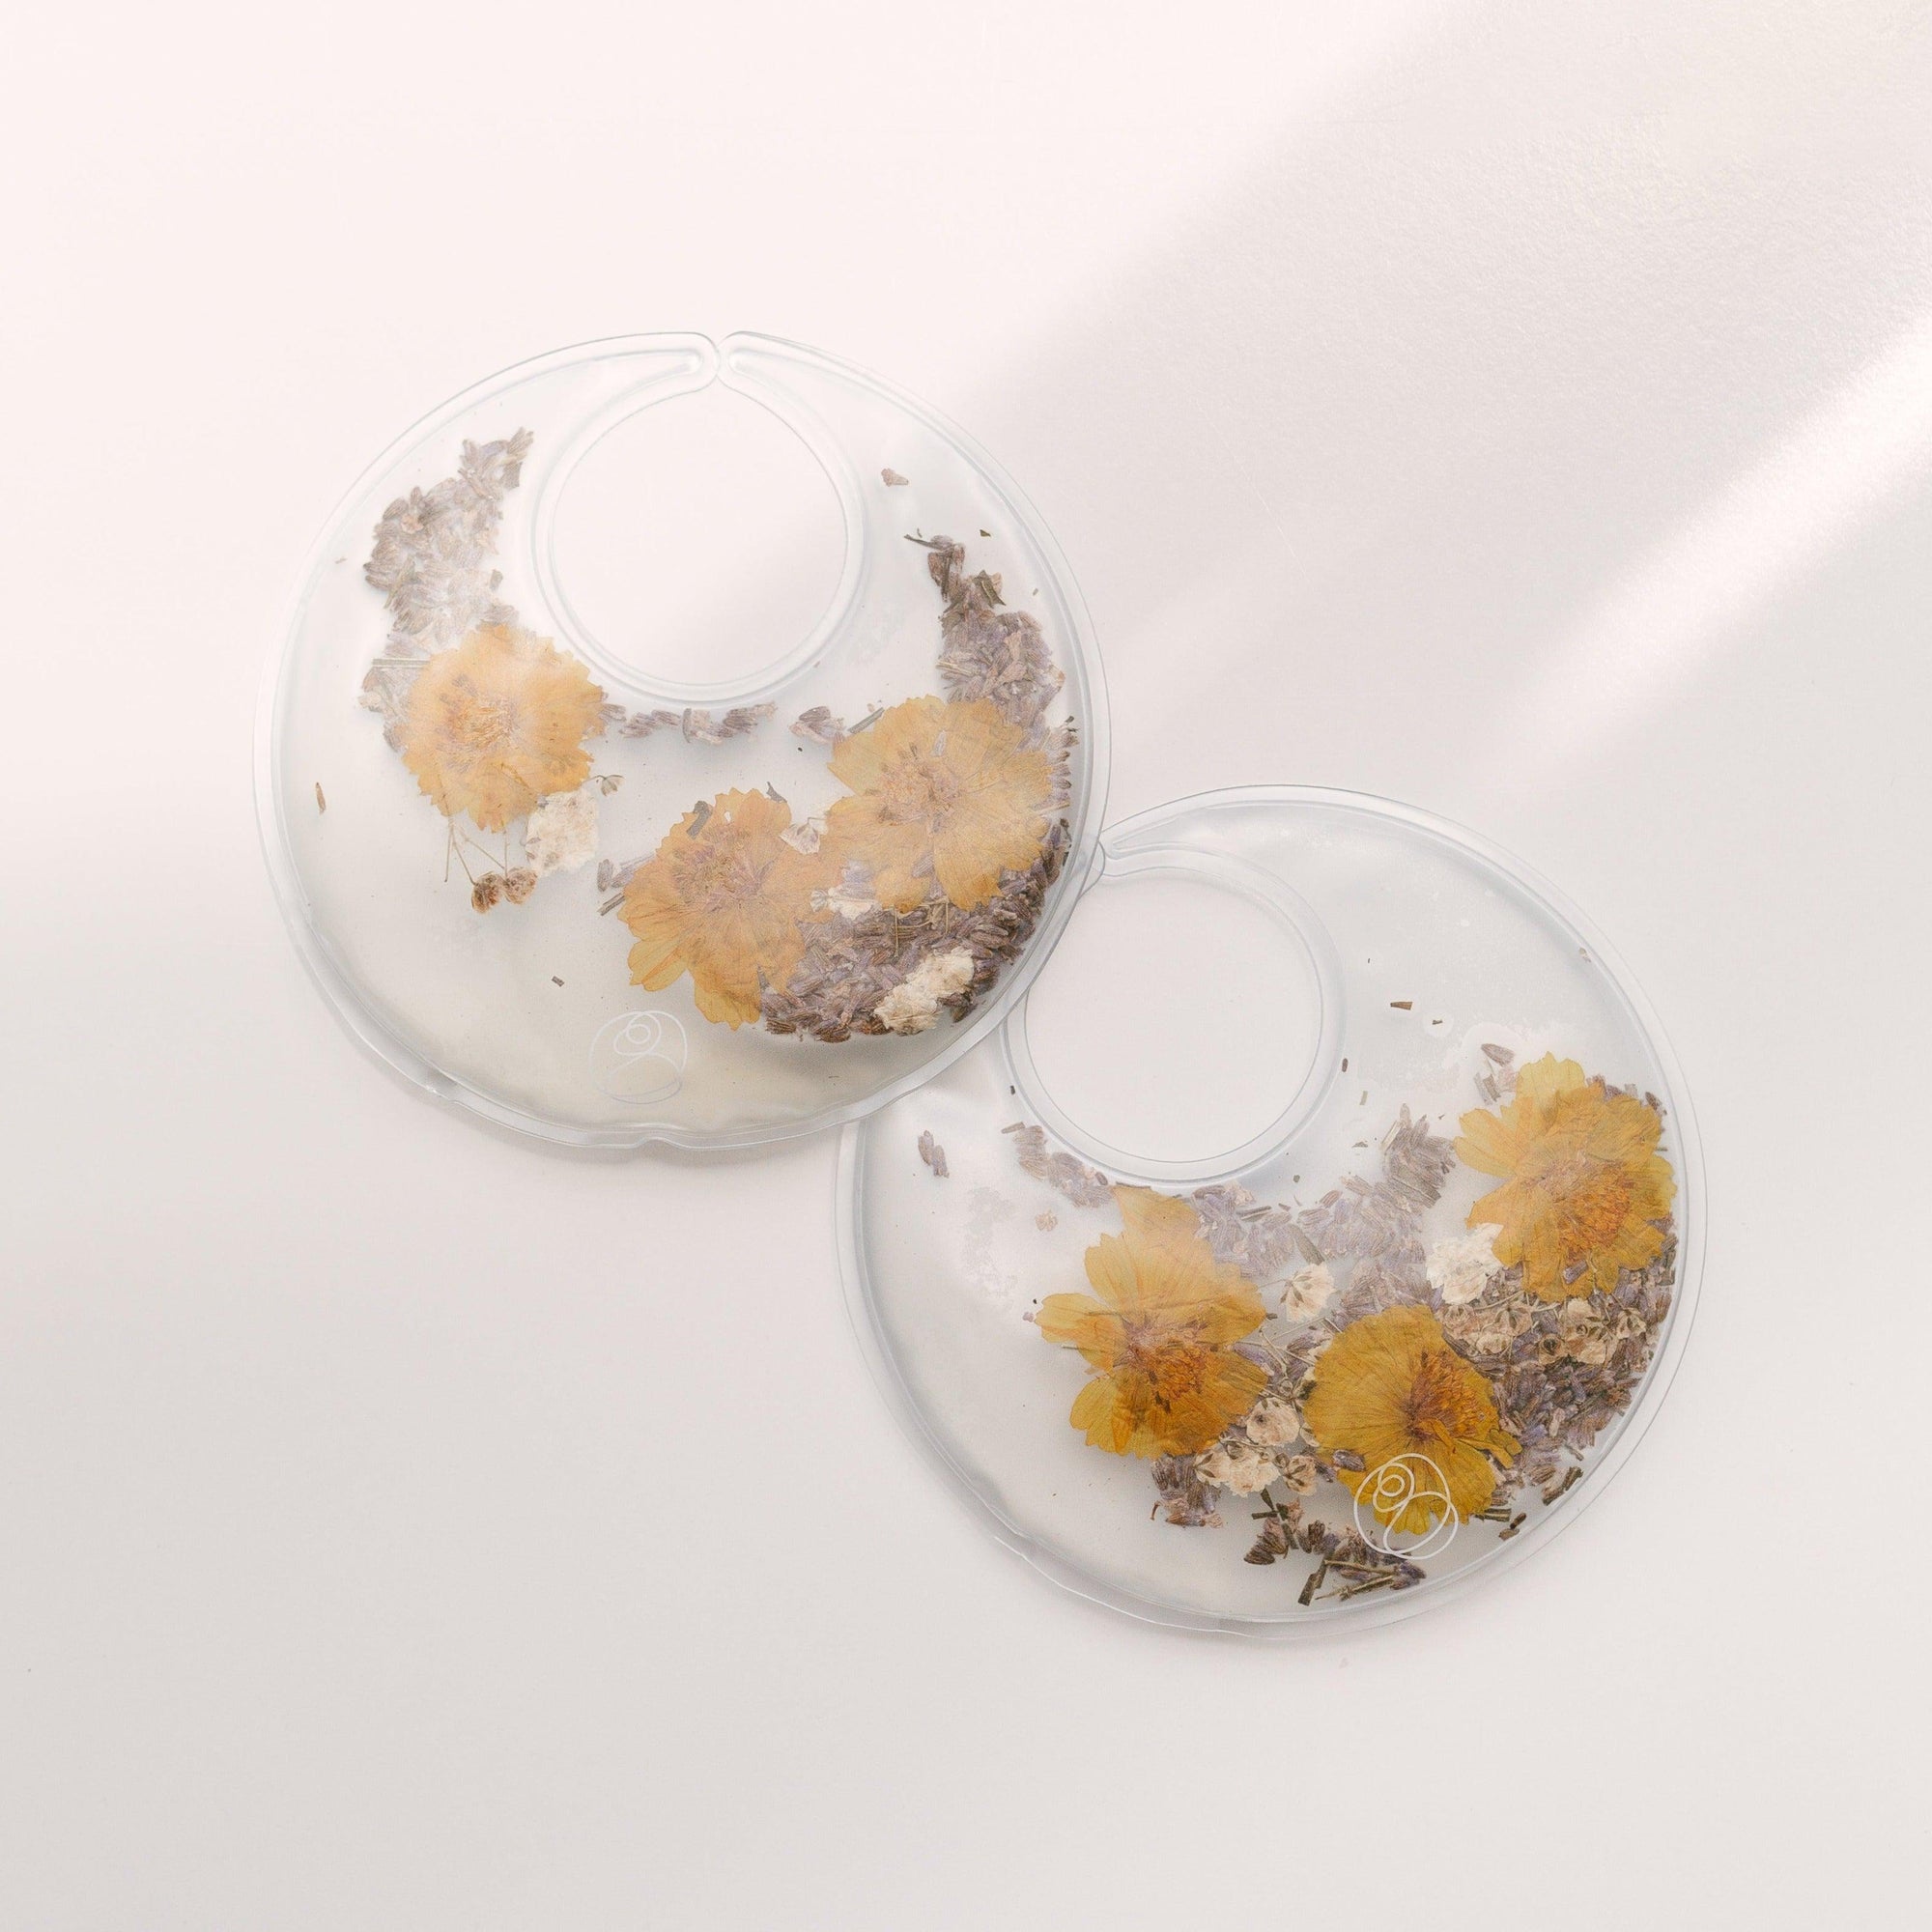 A pair of Breast Warm & Cool Insert earrings by Bare Mum with dried flowers on them.